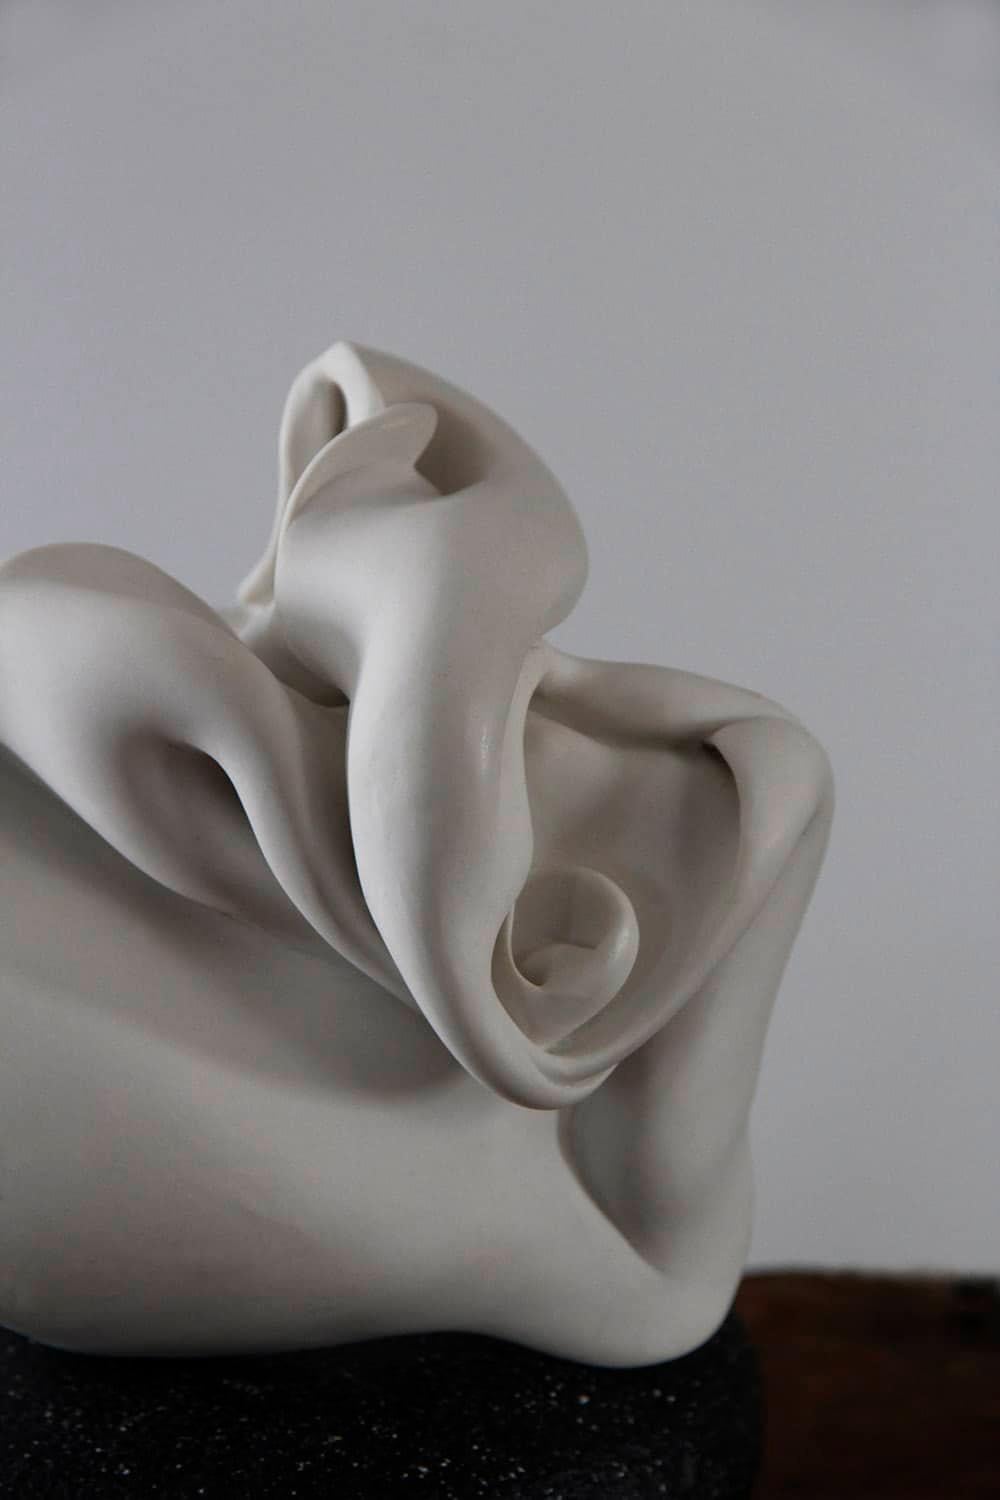 Conch 31 by Sharon Brill - Abstract sculpture, white, geometric, motion 3